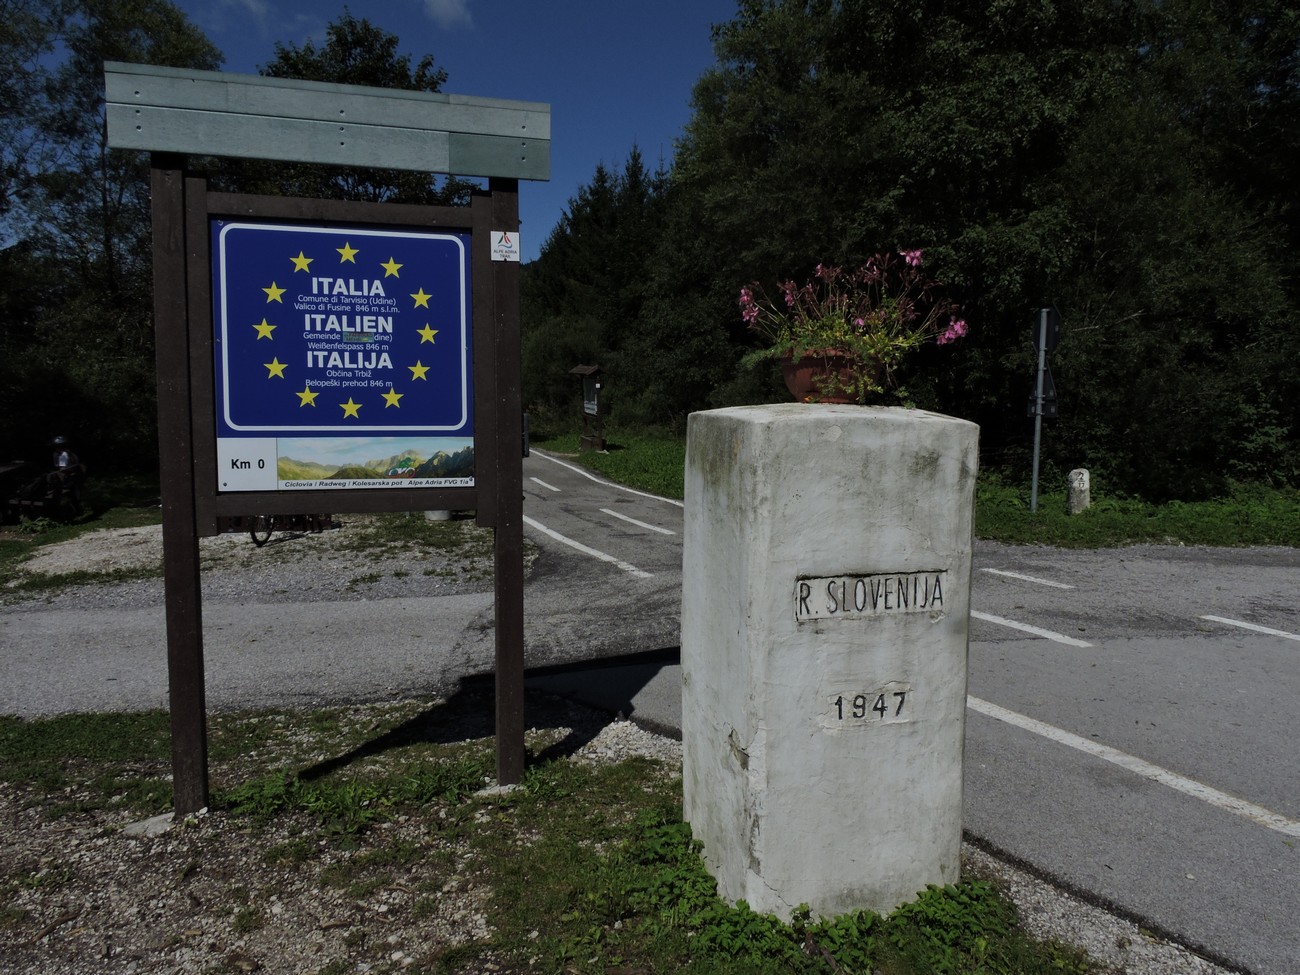 In the area of Rateče the locations of the boundary stones of the Rapallo border and of the later occupation border still serve their purpose. A boundary stone at the former railway border crossing at Rateče. The year 1947 marks the new border agreement reached after World War II when the Rapallo border formally ceased to exist. Author: Matija Zorn.